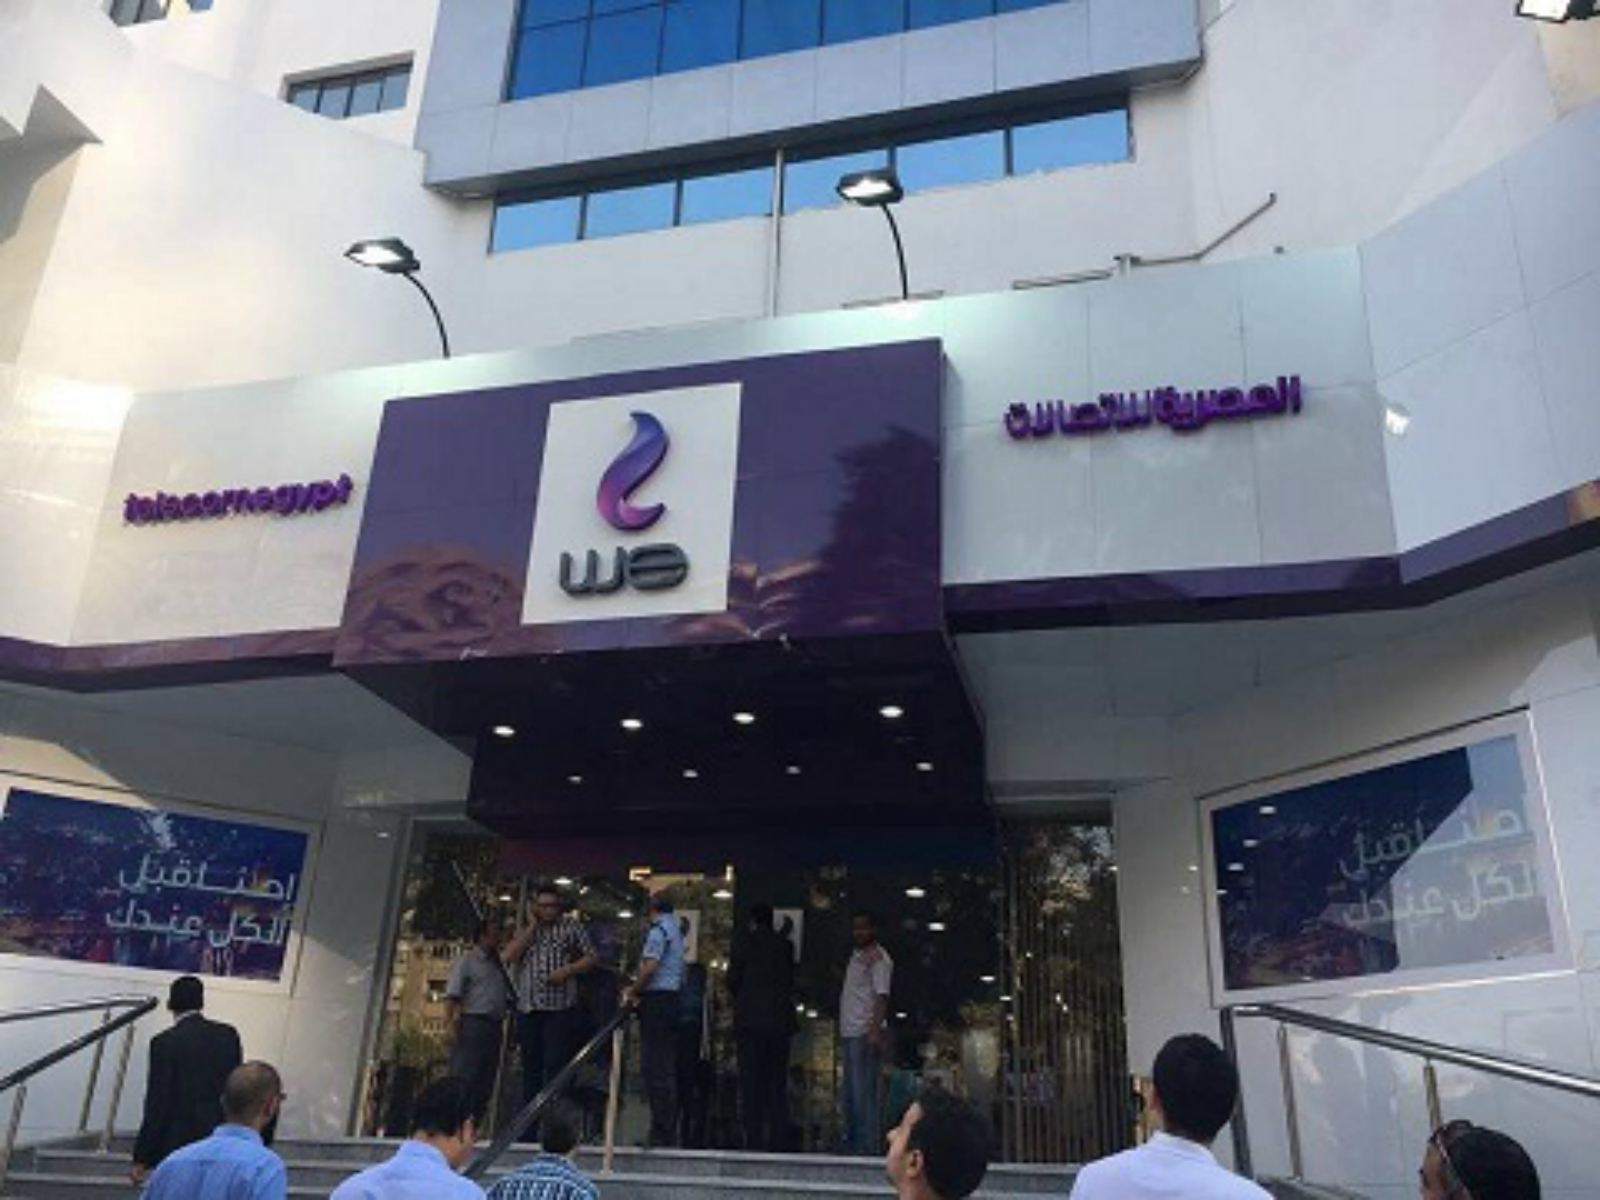 Telecom Egypt to go live with country's 4th mobile operator "WE" in a week  - Egypt Independent